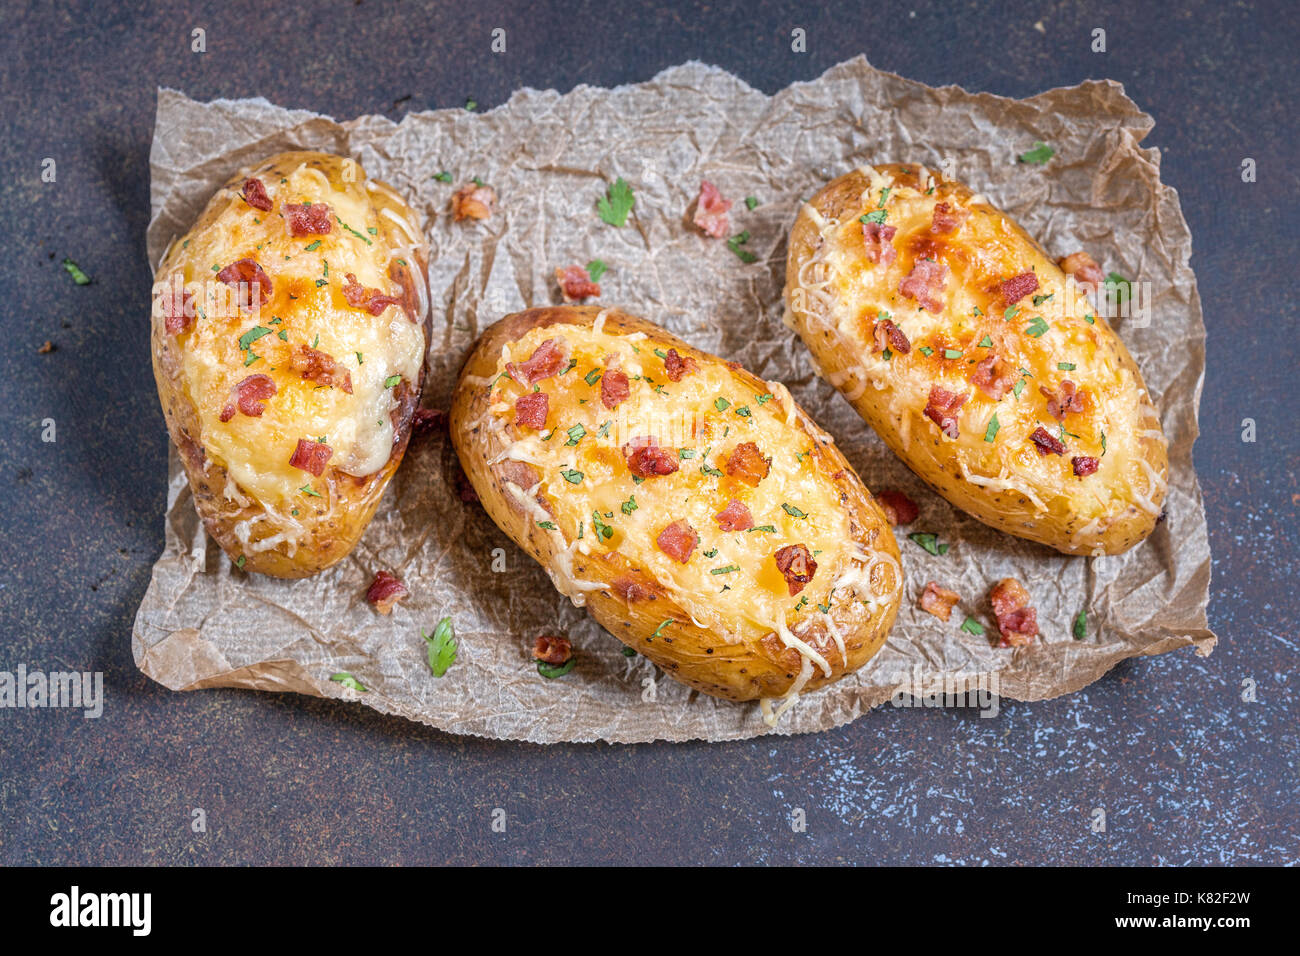 Baked loaded potato with bacon, cheese and onion Stock Photo